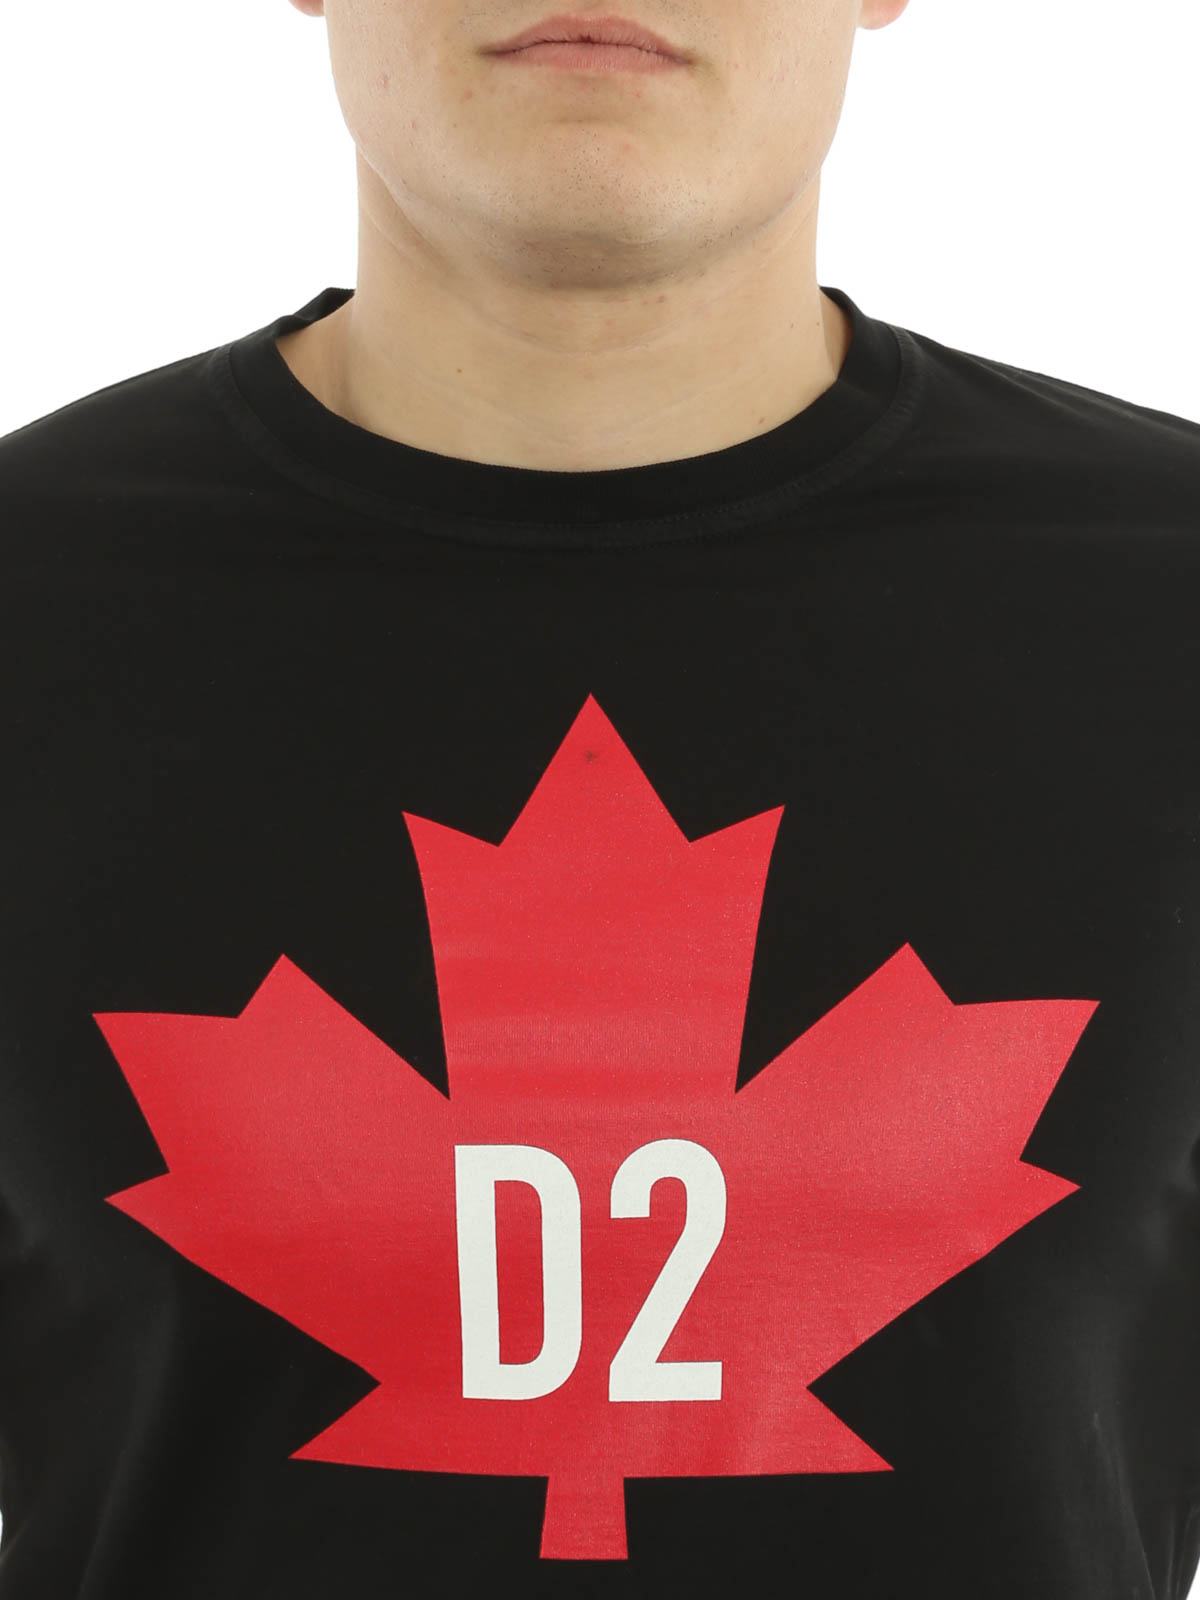 tee shirt dsquared2 canada